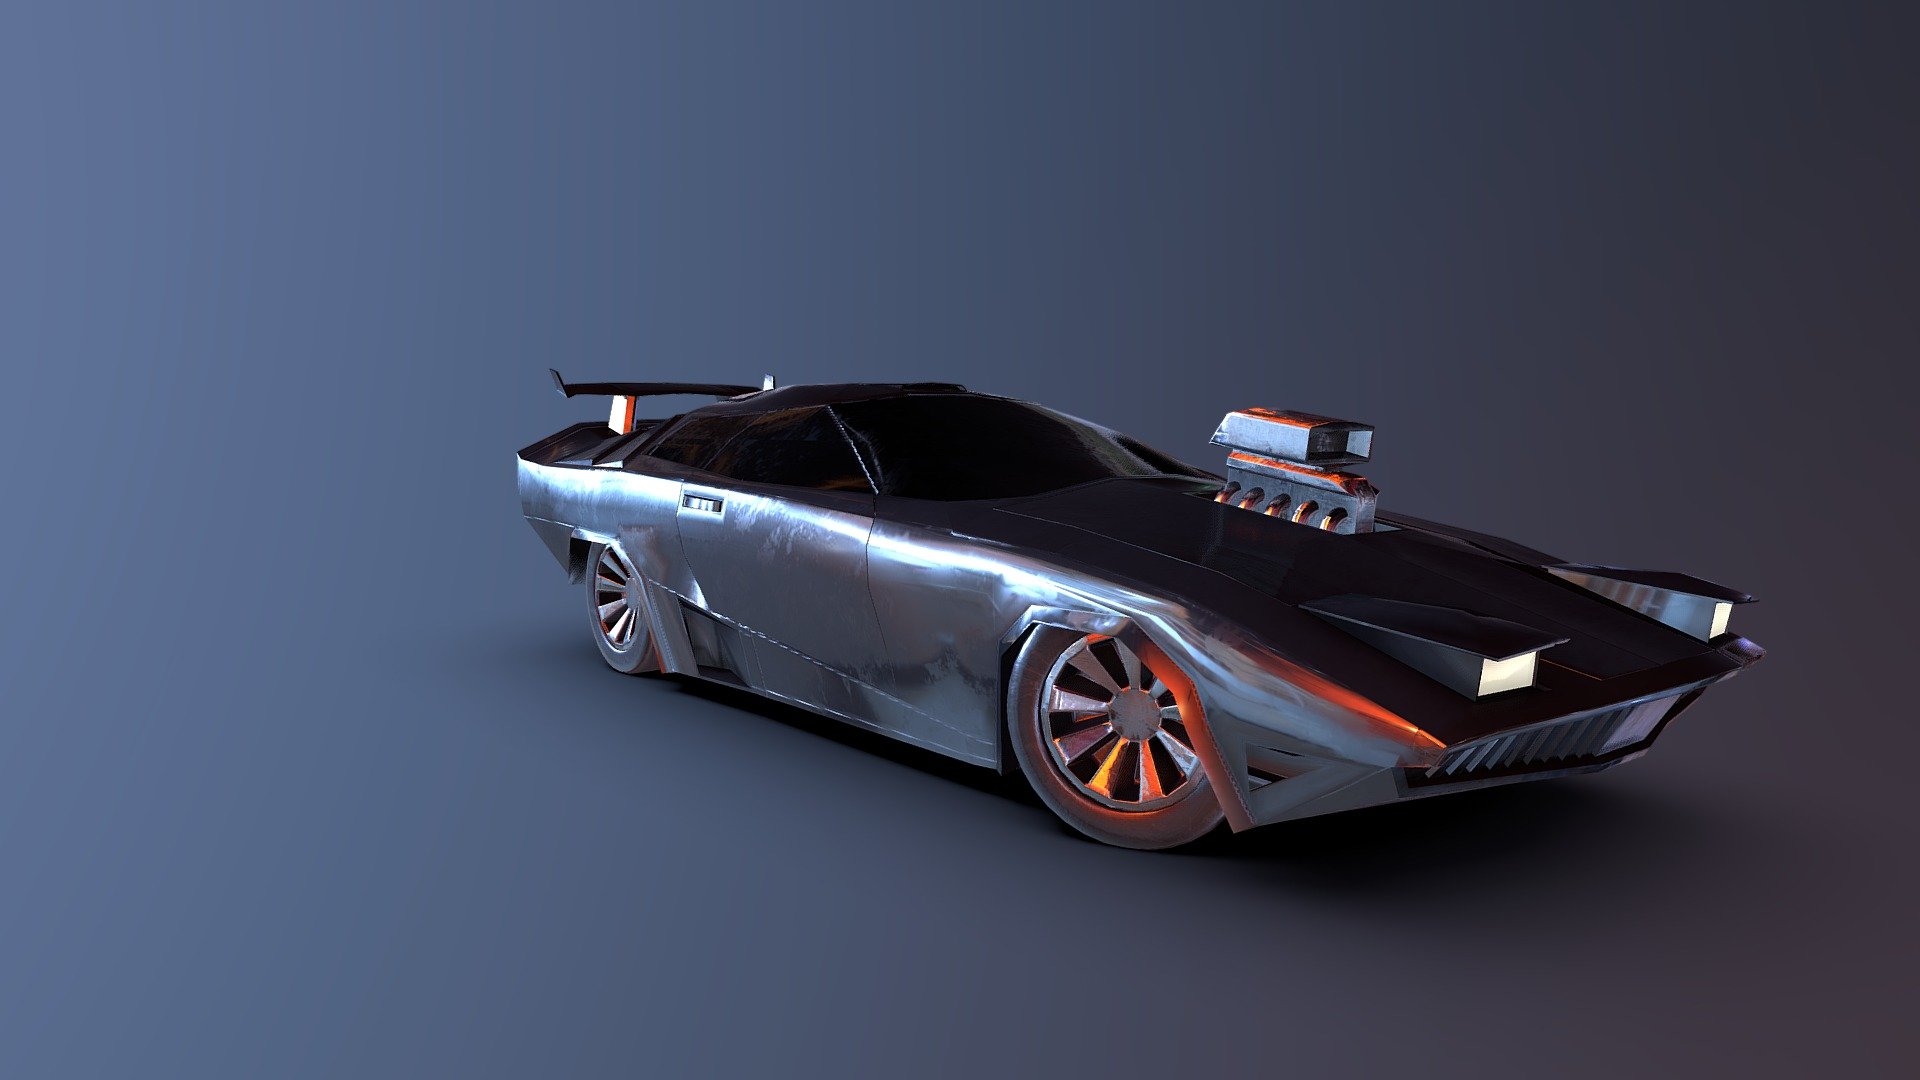 A cuberpunk car of the future.
inspired by blade runner, knight rider and cyberpunk game.
modeled in 3ds max and painted in substance painter 3d model